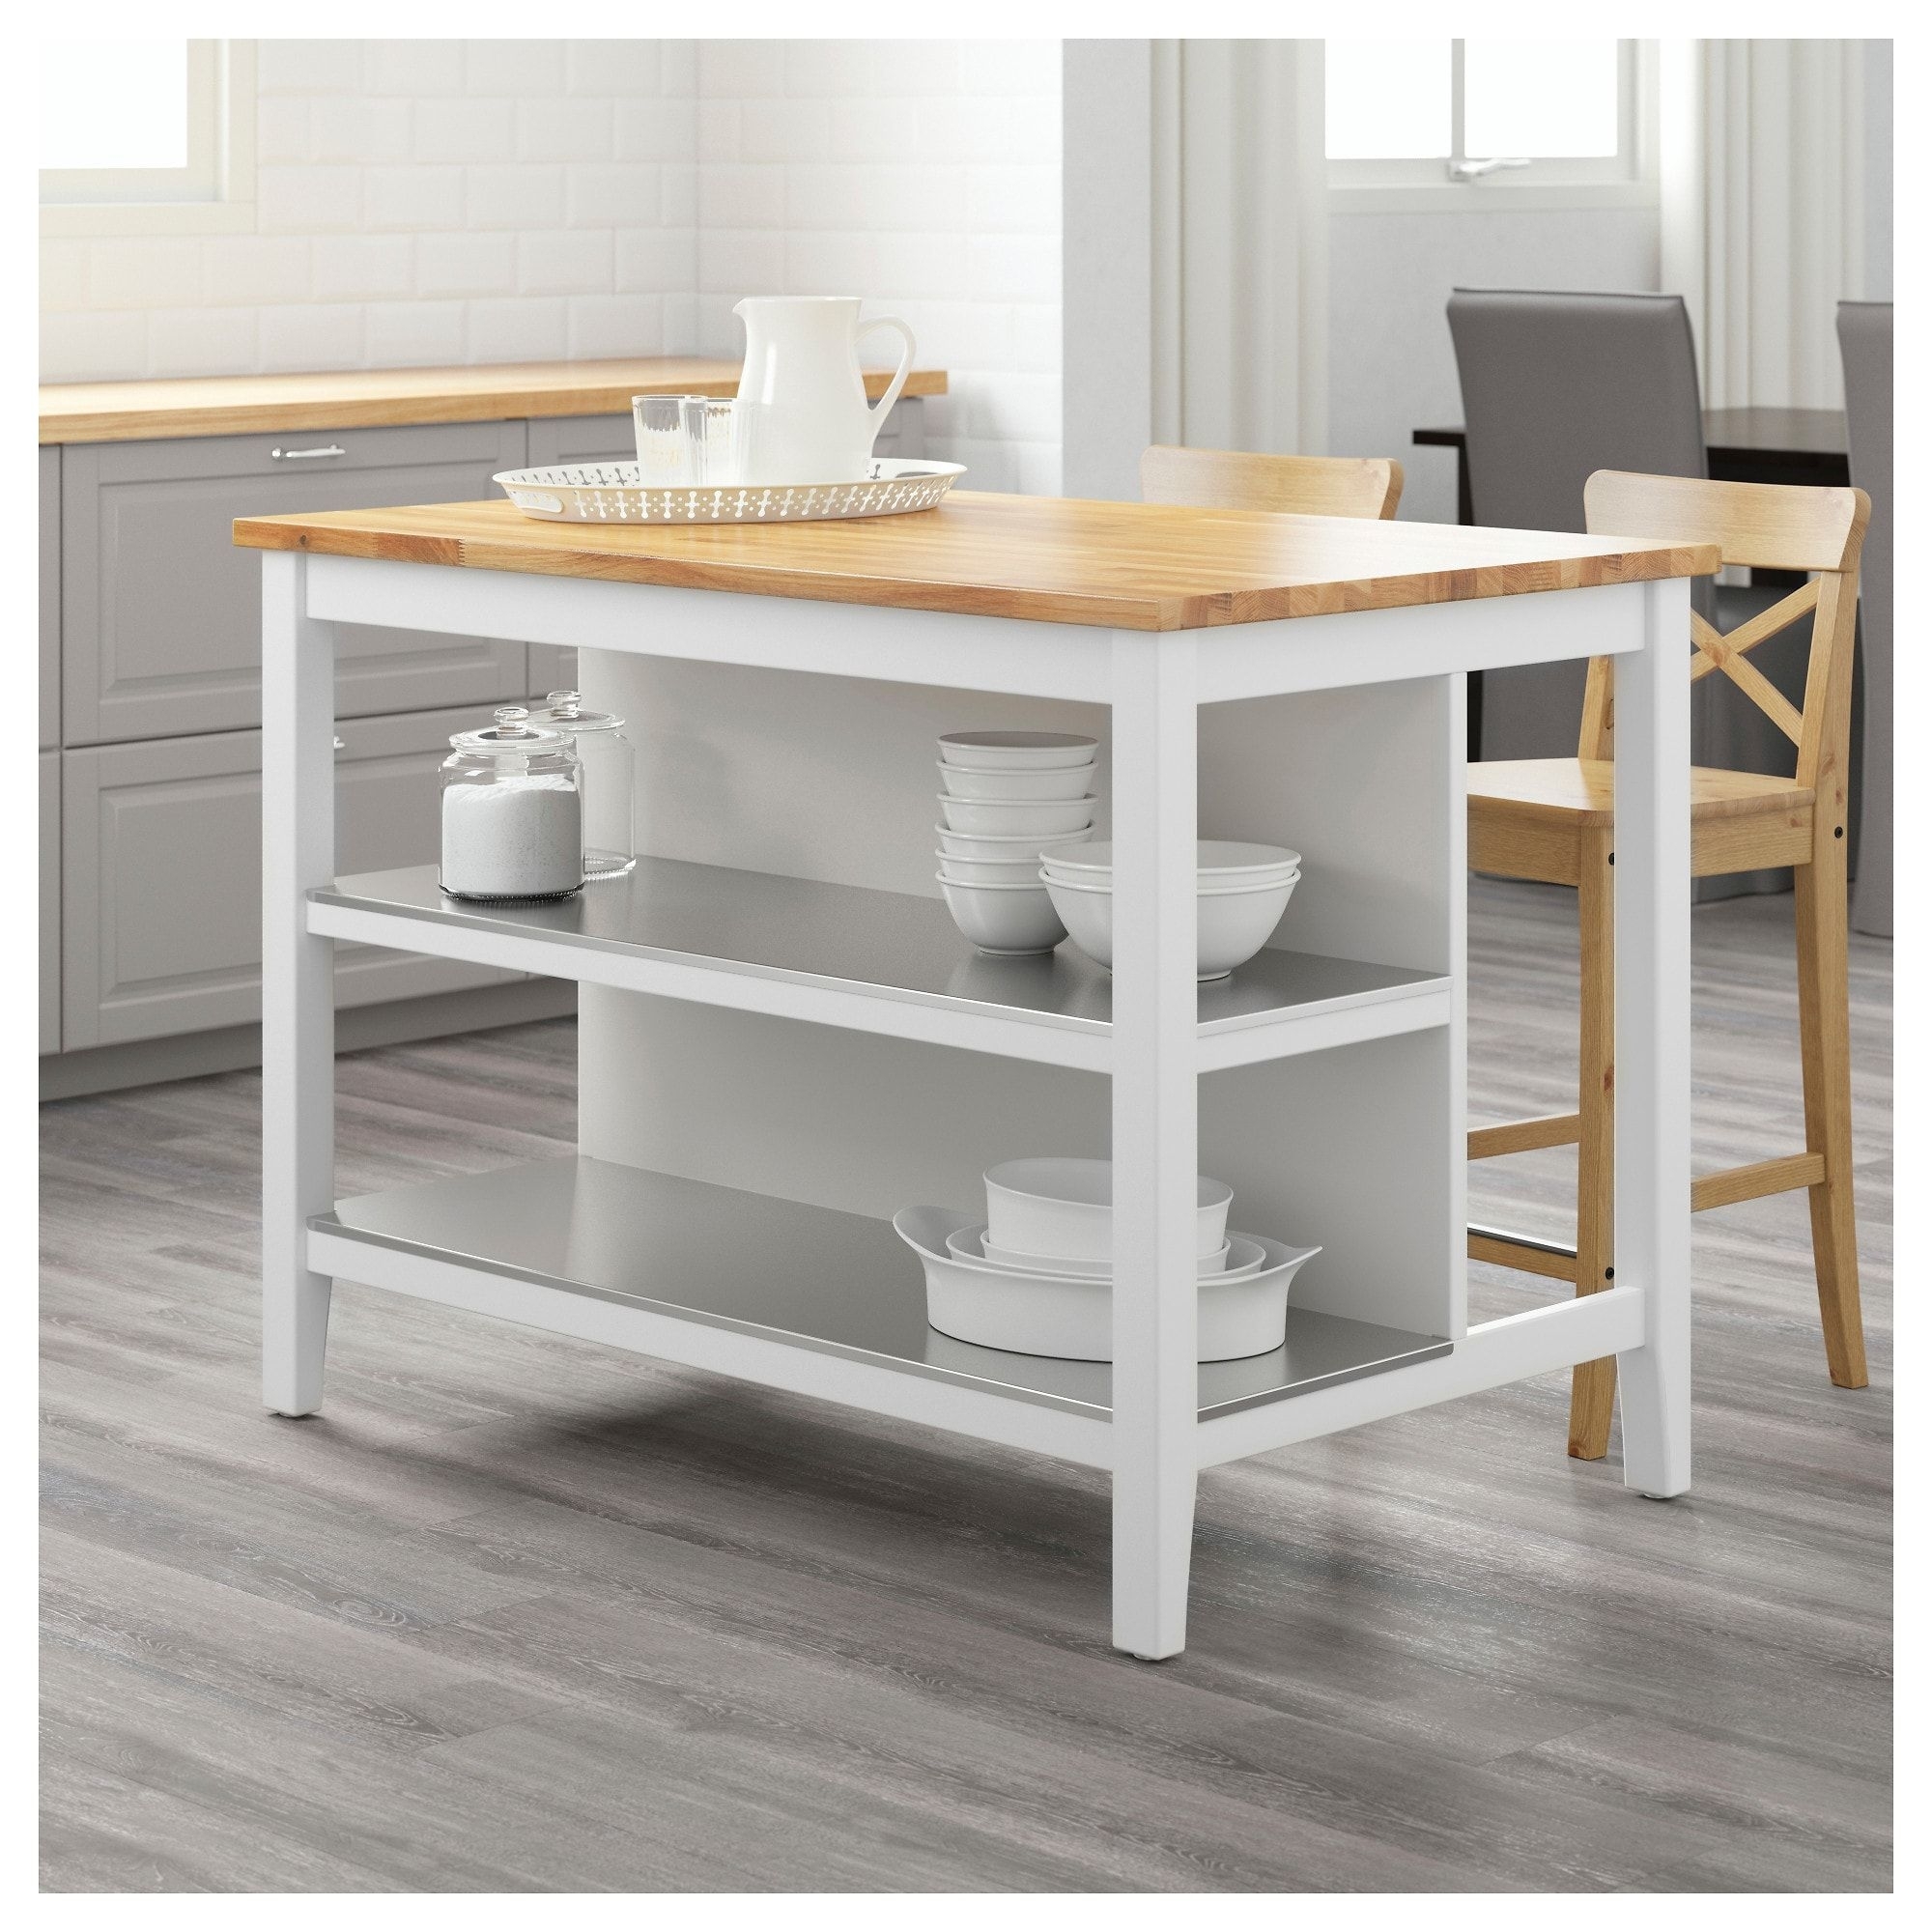 ikea kitchen islands - to buy or not in ikea? 7 reviews - visualhunt